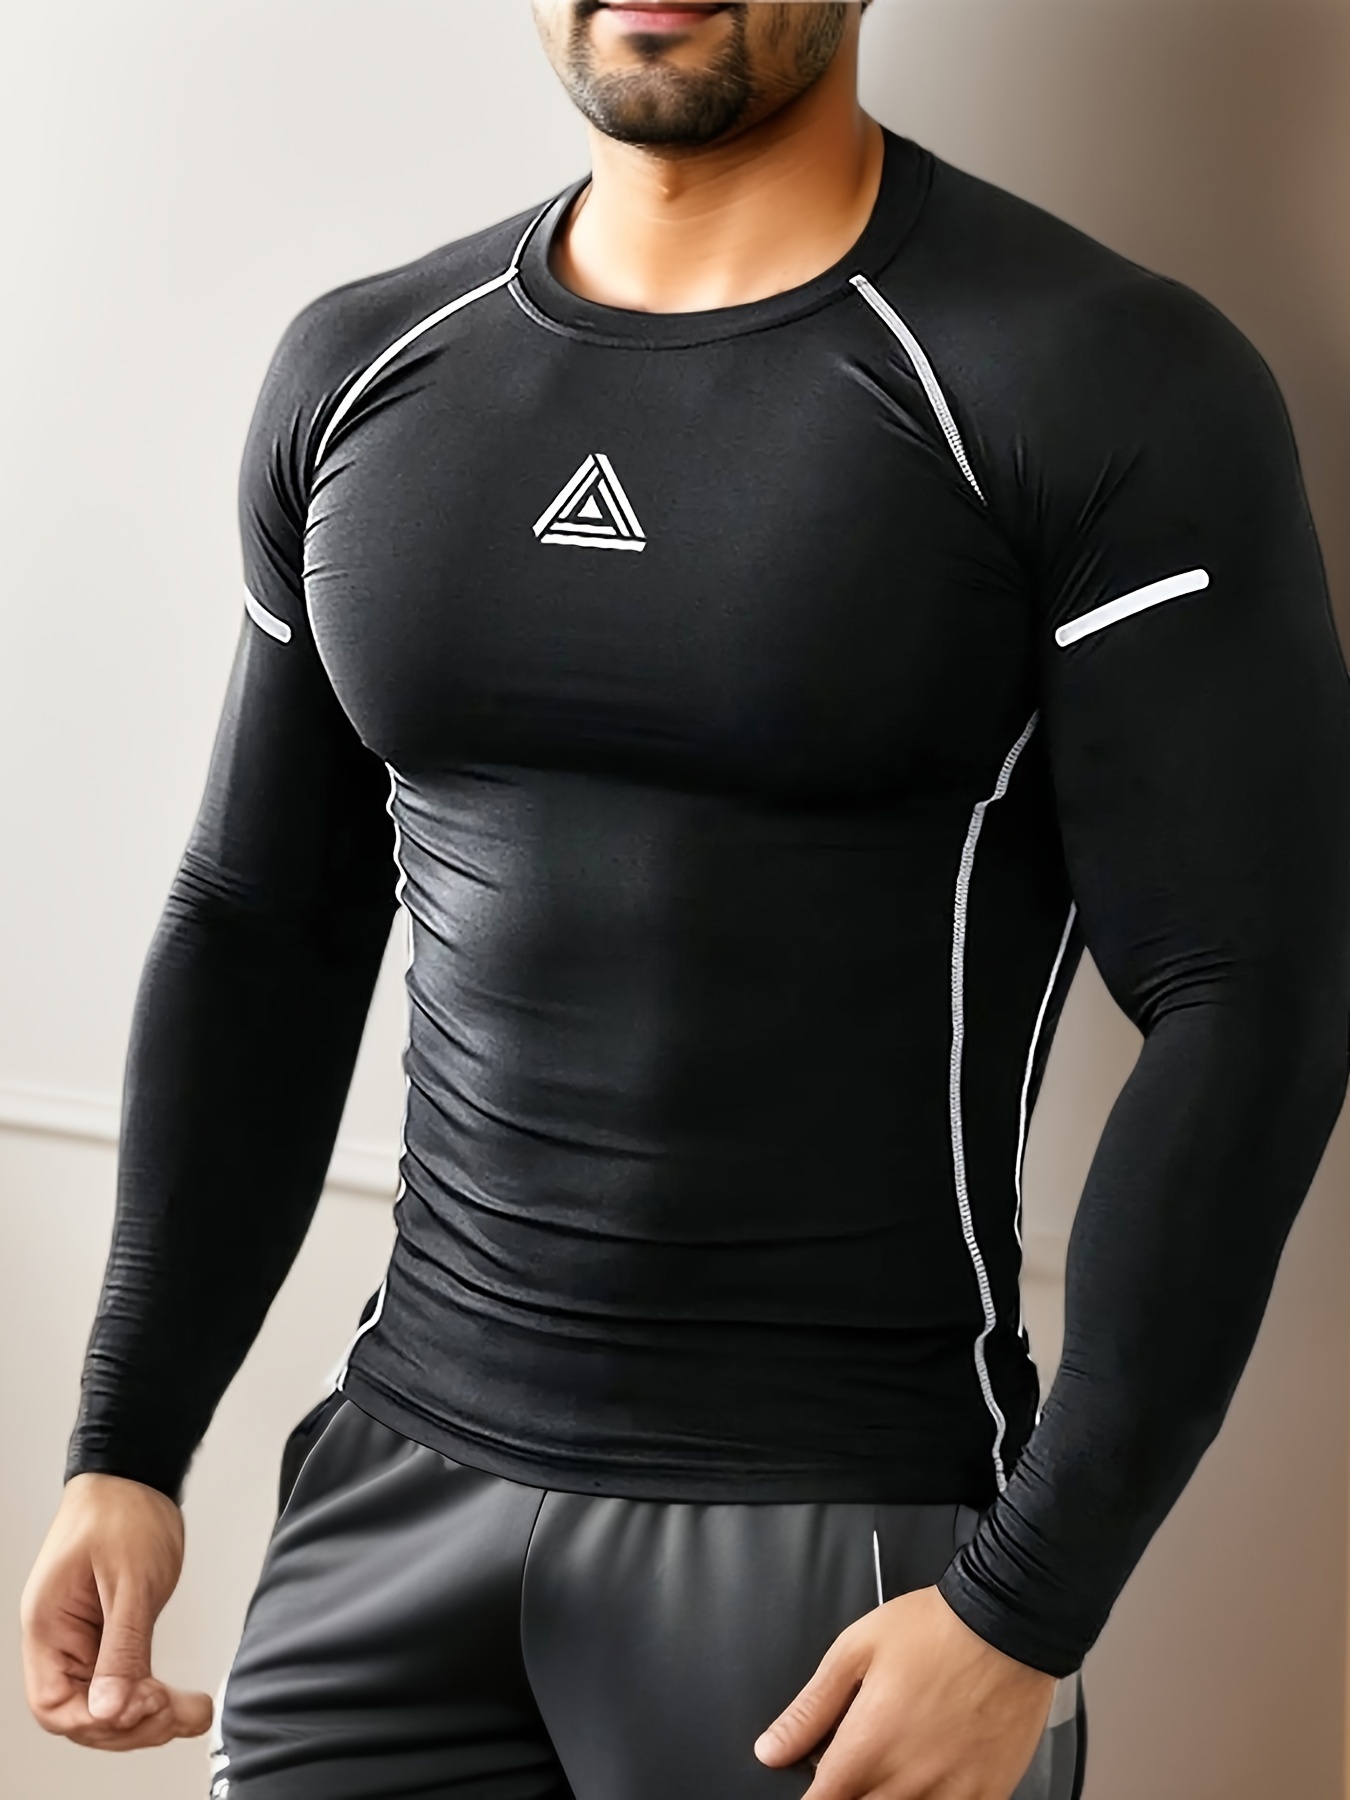  Men's Dry Fit Athletic Shirt,Men's Short Sleeve Compression  Shirt Base Layer Undershirts Active Athletic Dry Fit Top Black : Clothing,  Shoes & Jewelry